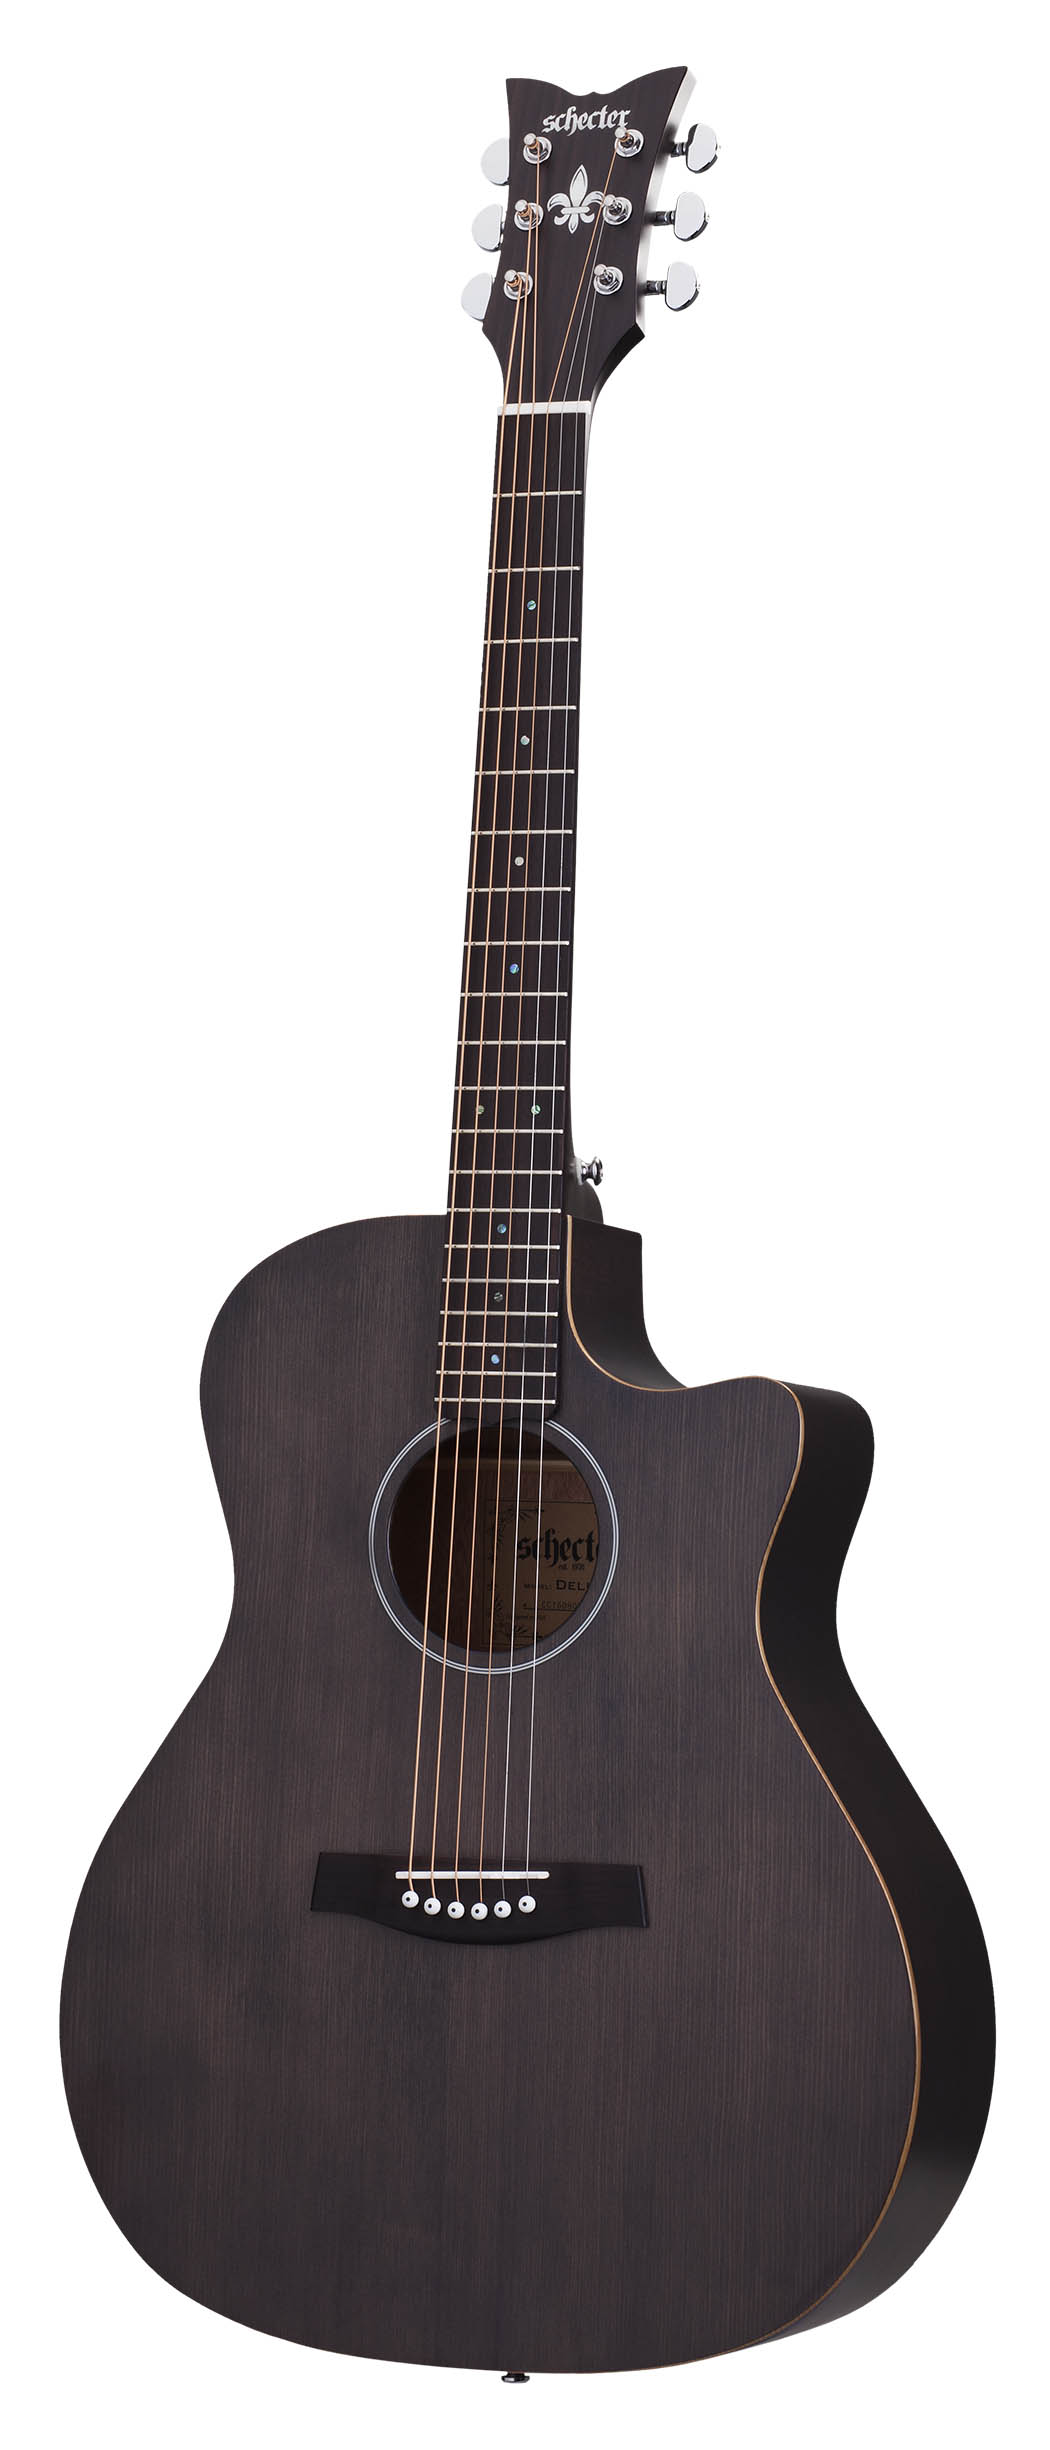 An image of Schecter Deluxe Acoustic in Satin See Thru Black | PMT Online